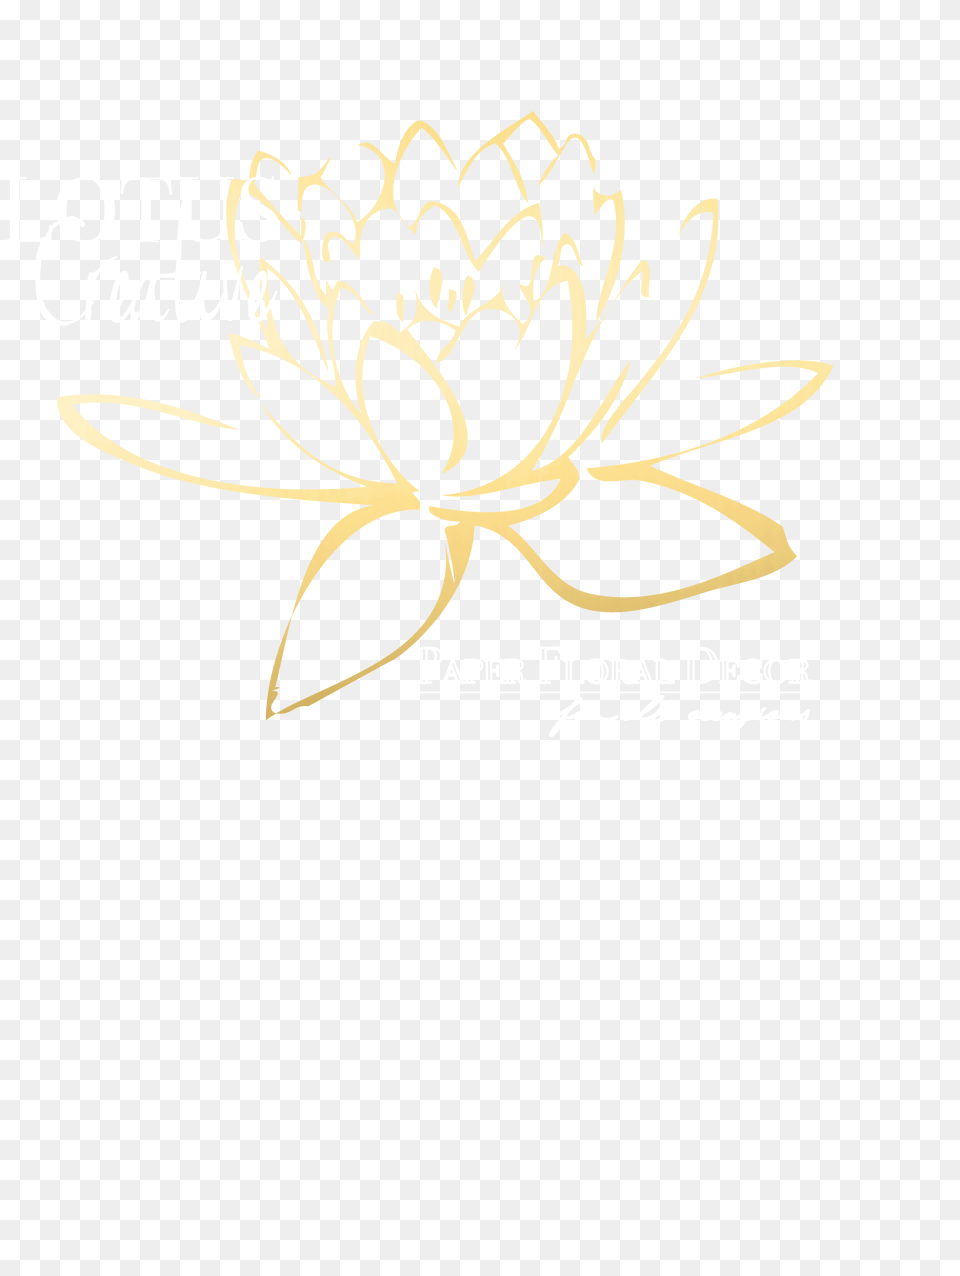 About Us, Plant, Flower, Dahlia, Daisy Png